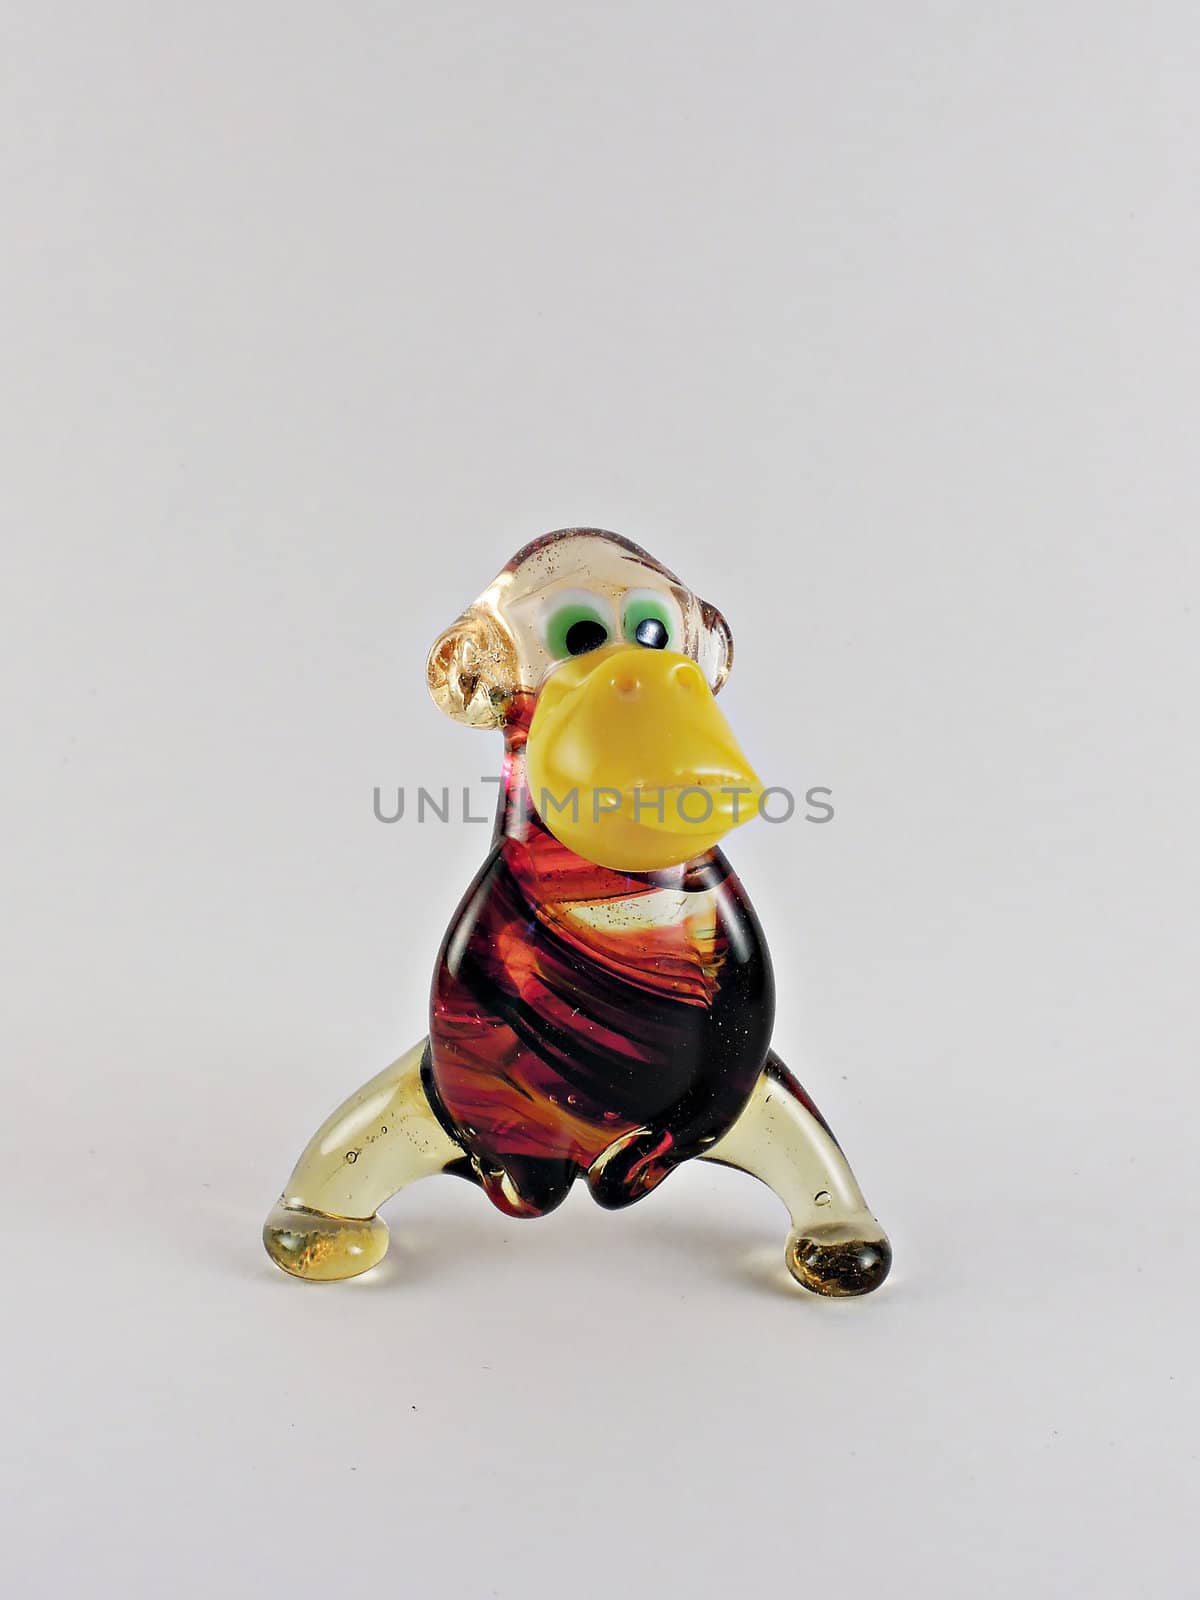 Toy monkey made from coloured glass